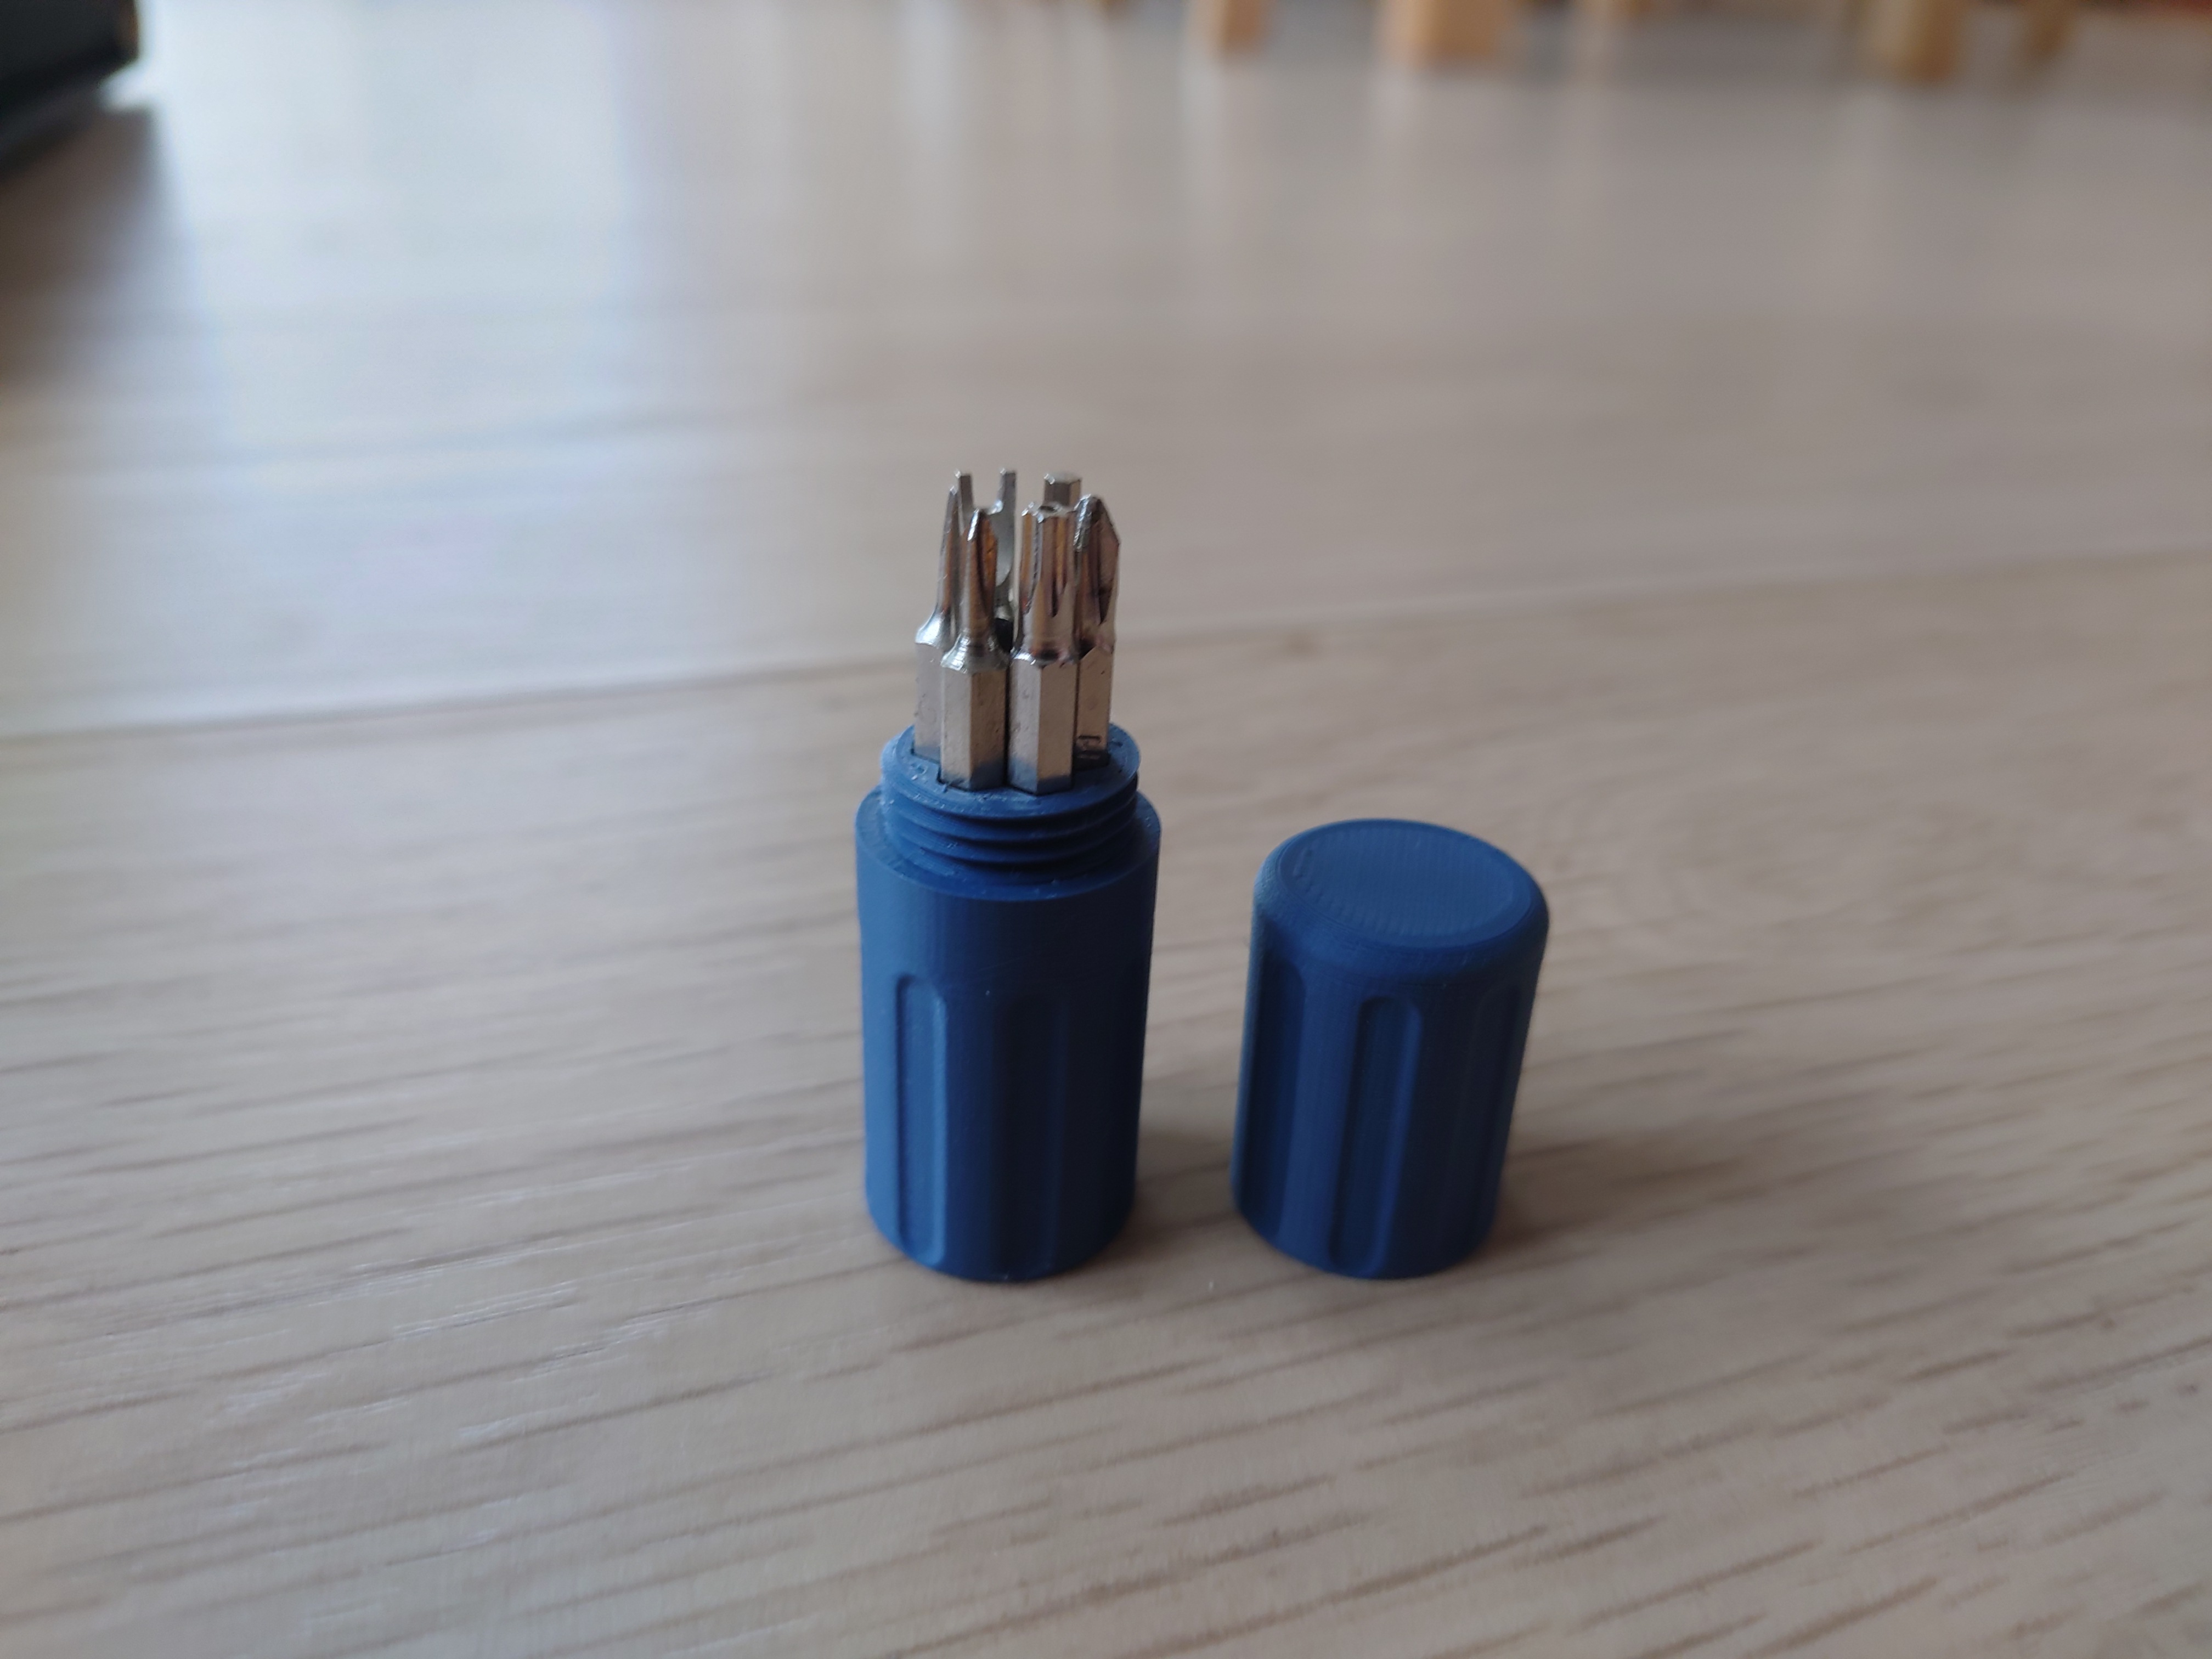 Extension for more 4mm bits in Reversible Ratcheting Screwdriver